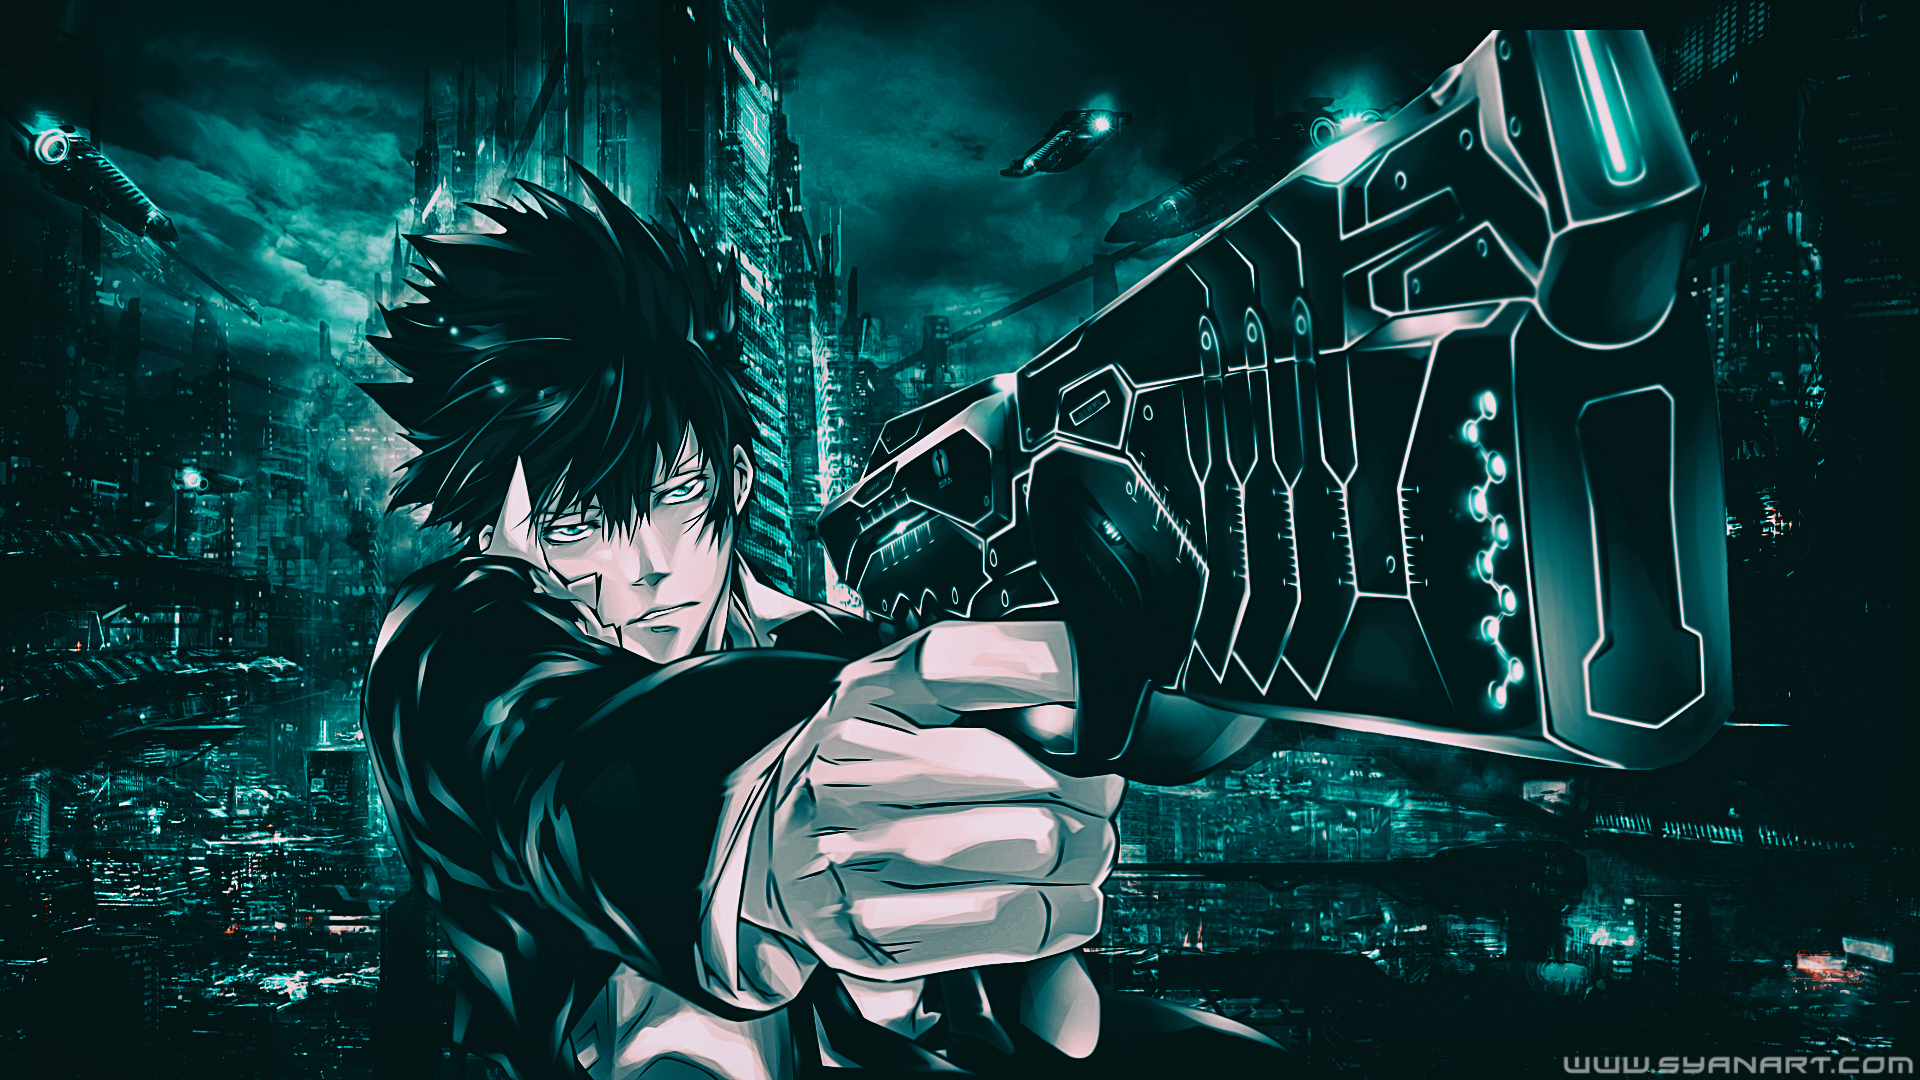 2560x1080 Shinya Kogami From Psycho Pass 2560x1080 Resolution Wallpaper Hd Anime 4k Wallpapers Images Photos And Background